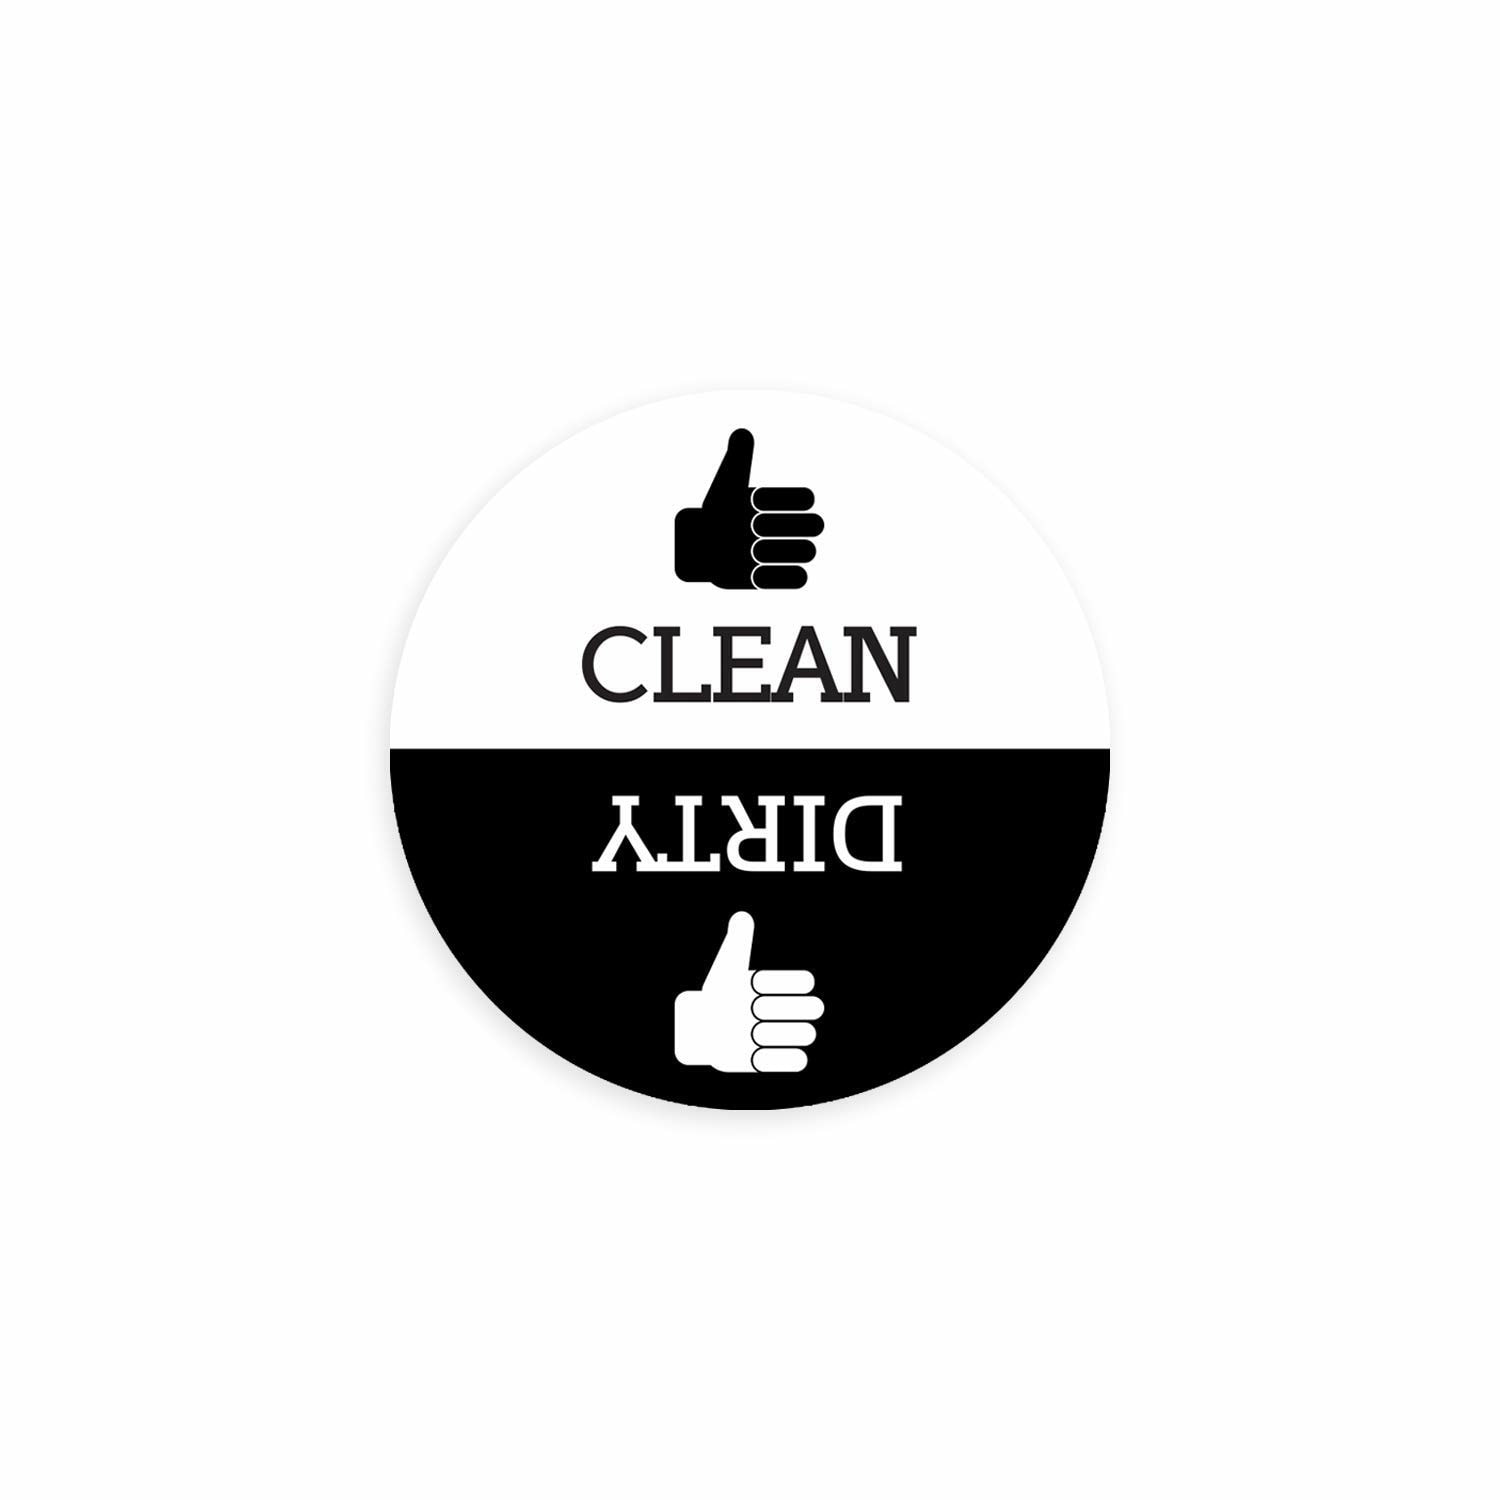 Dishwasher Magnet Clean Dirty Sign - 3 Inch Round Black & White